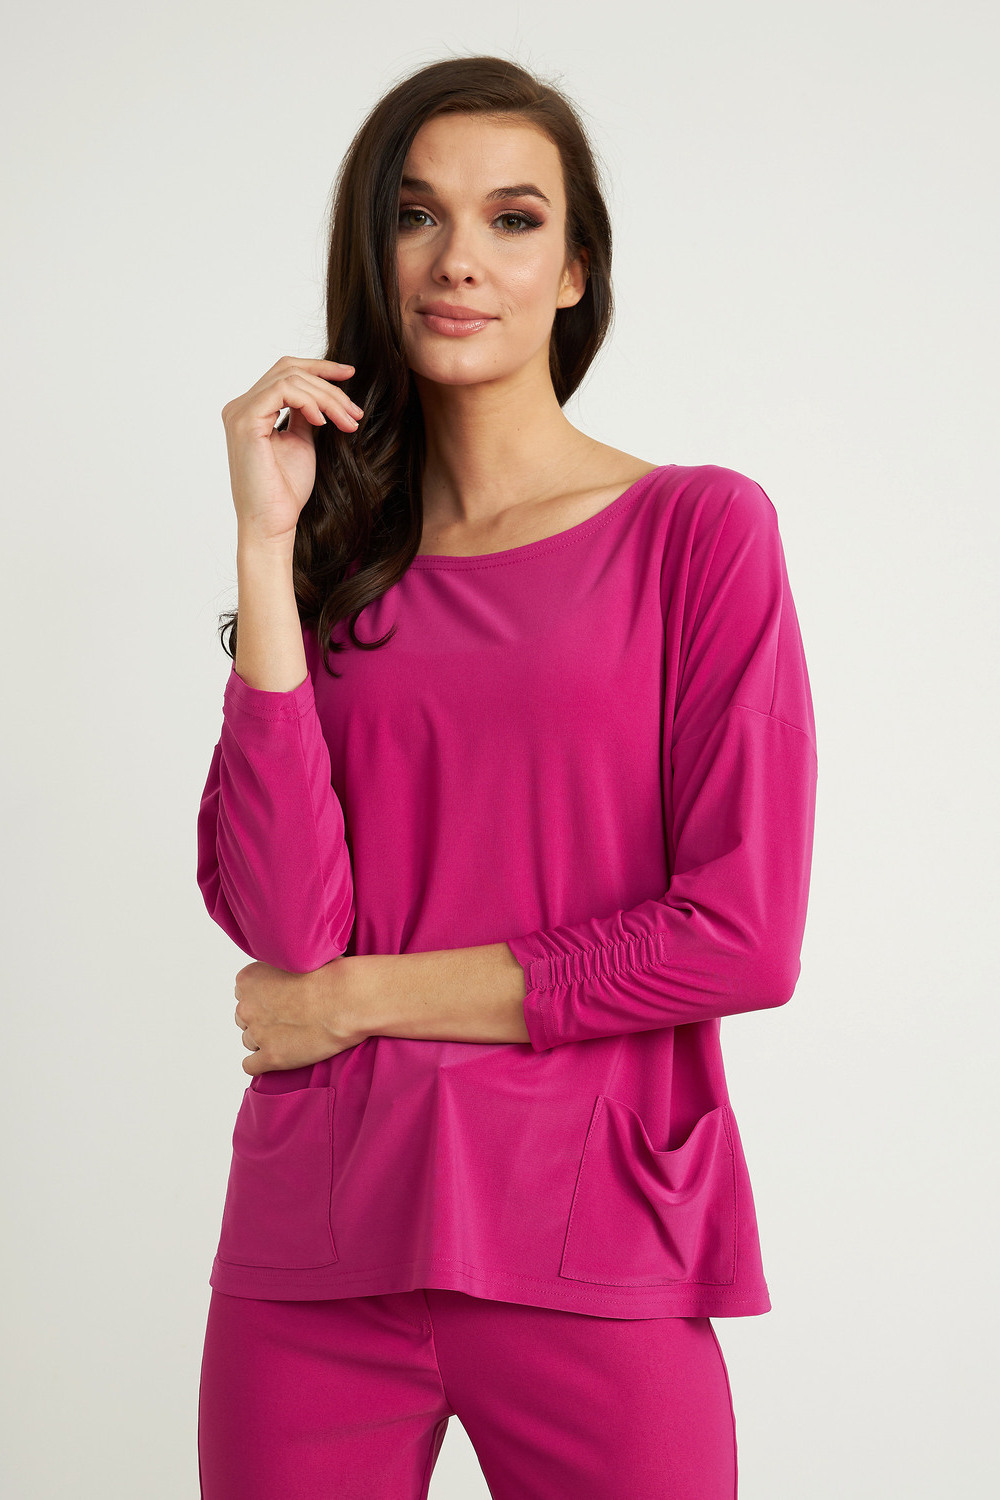 Joseph Ribkoff Pocket Detail Top Style 211327. Orchid